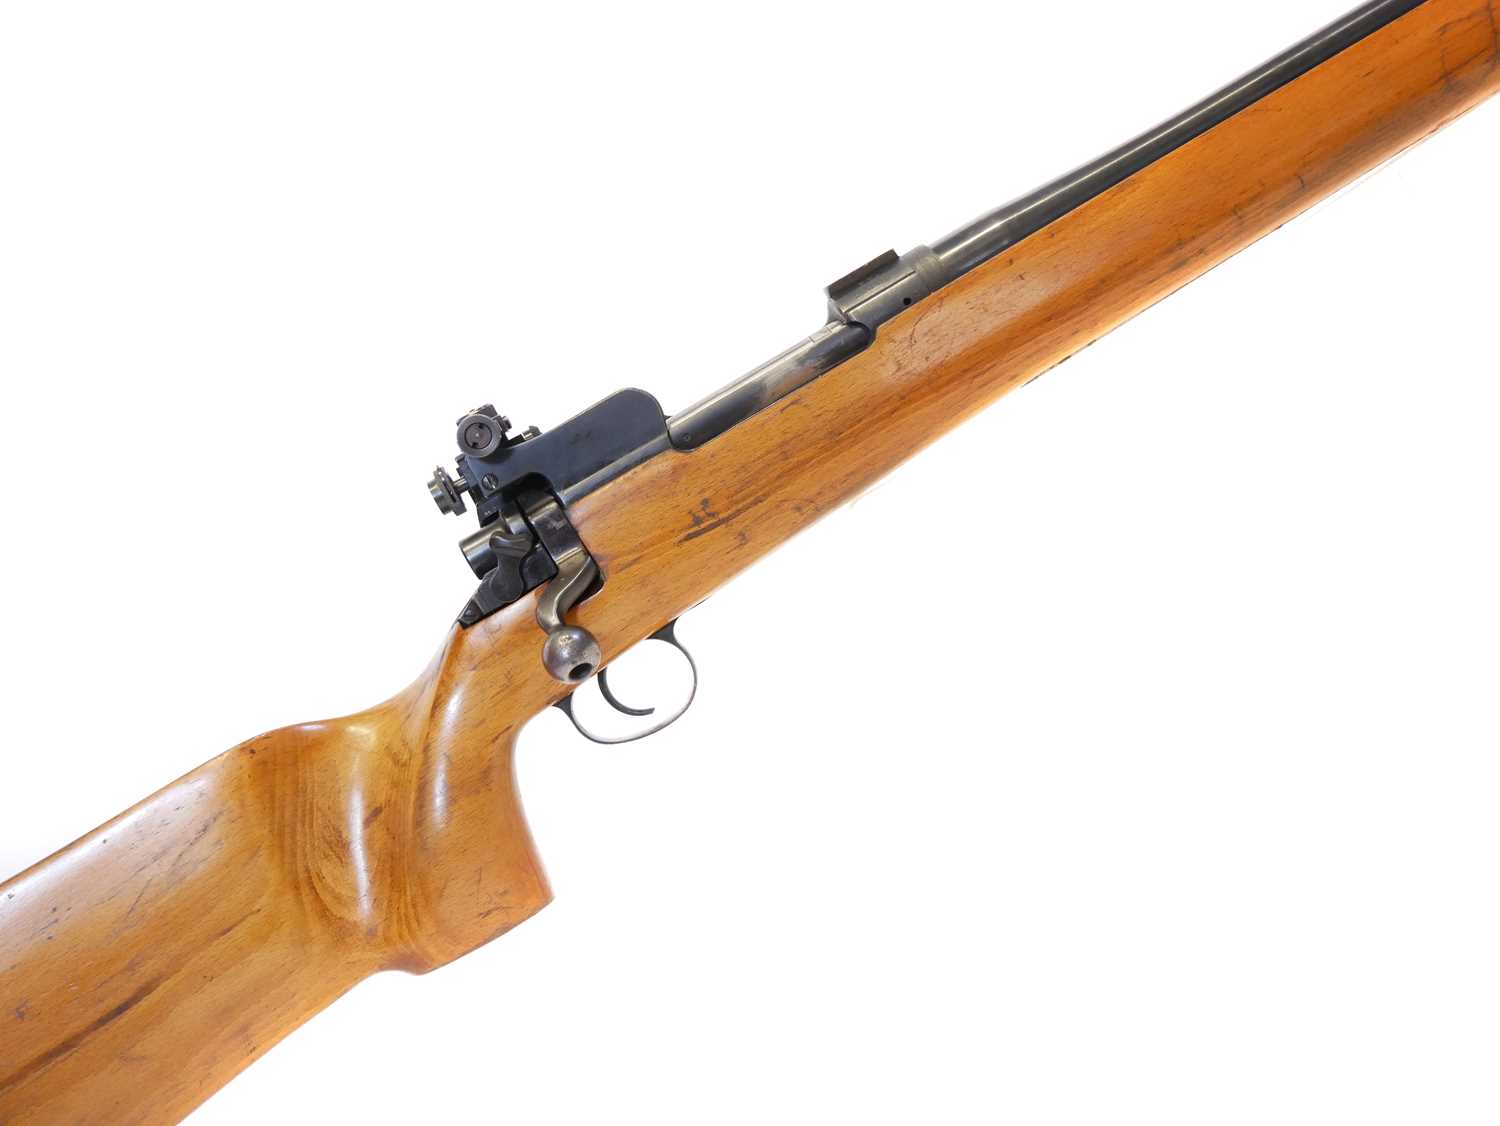 ERA P14 bolt action converted into a 7.62 x 51 target rifle, serial number 238462, 28inch heavy